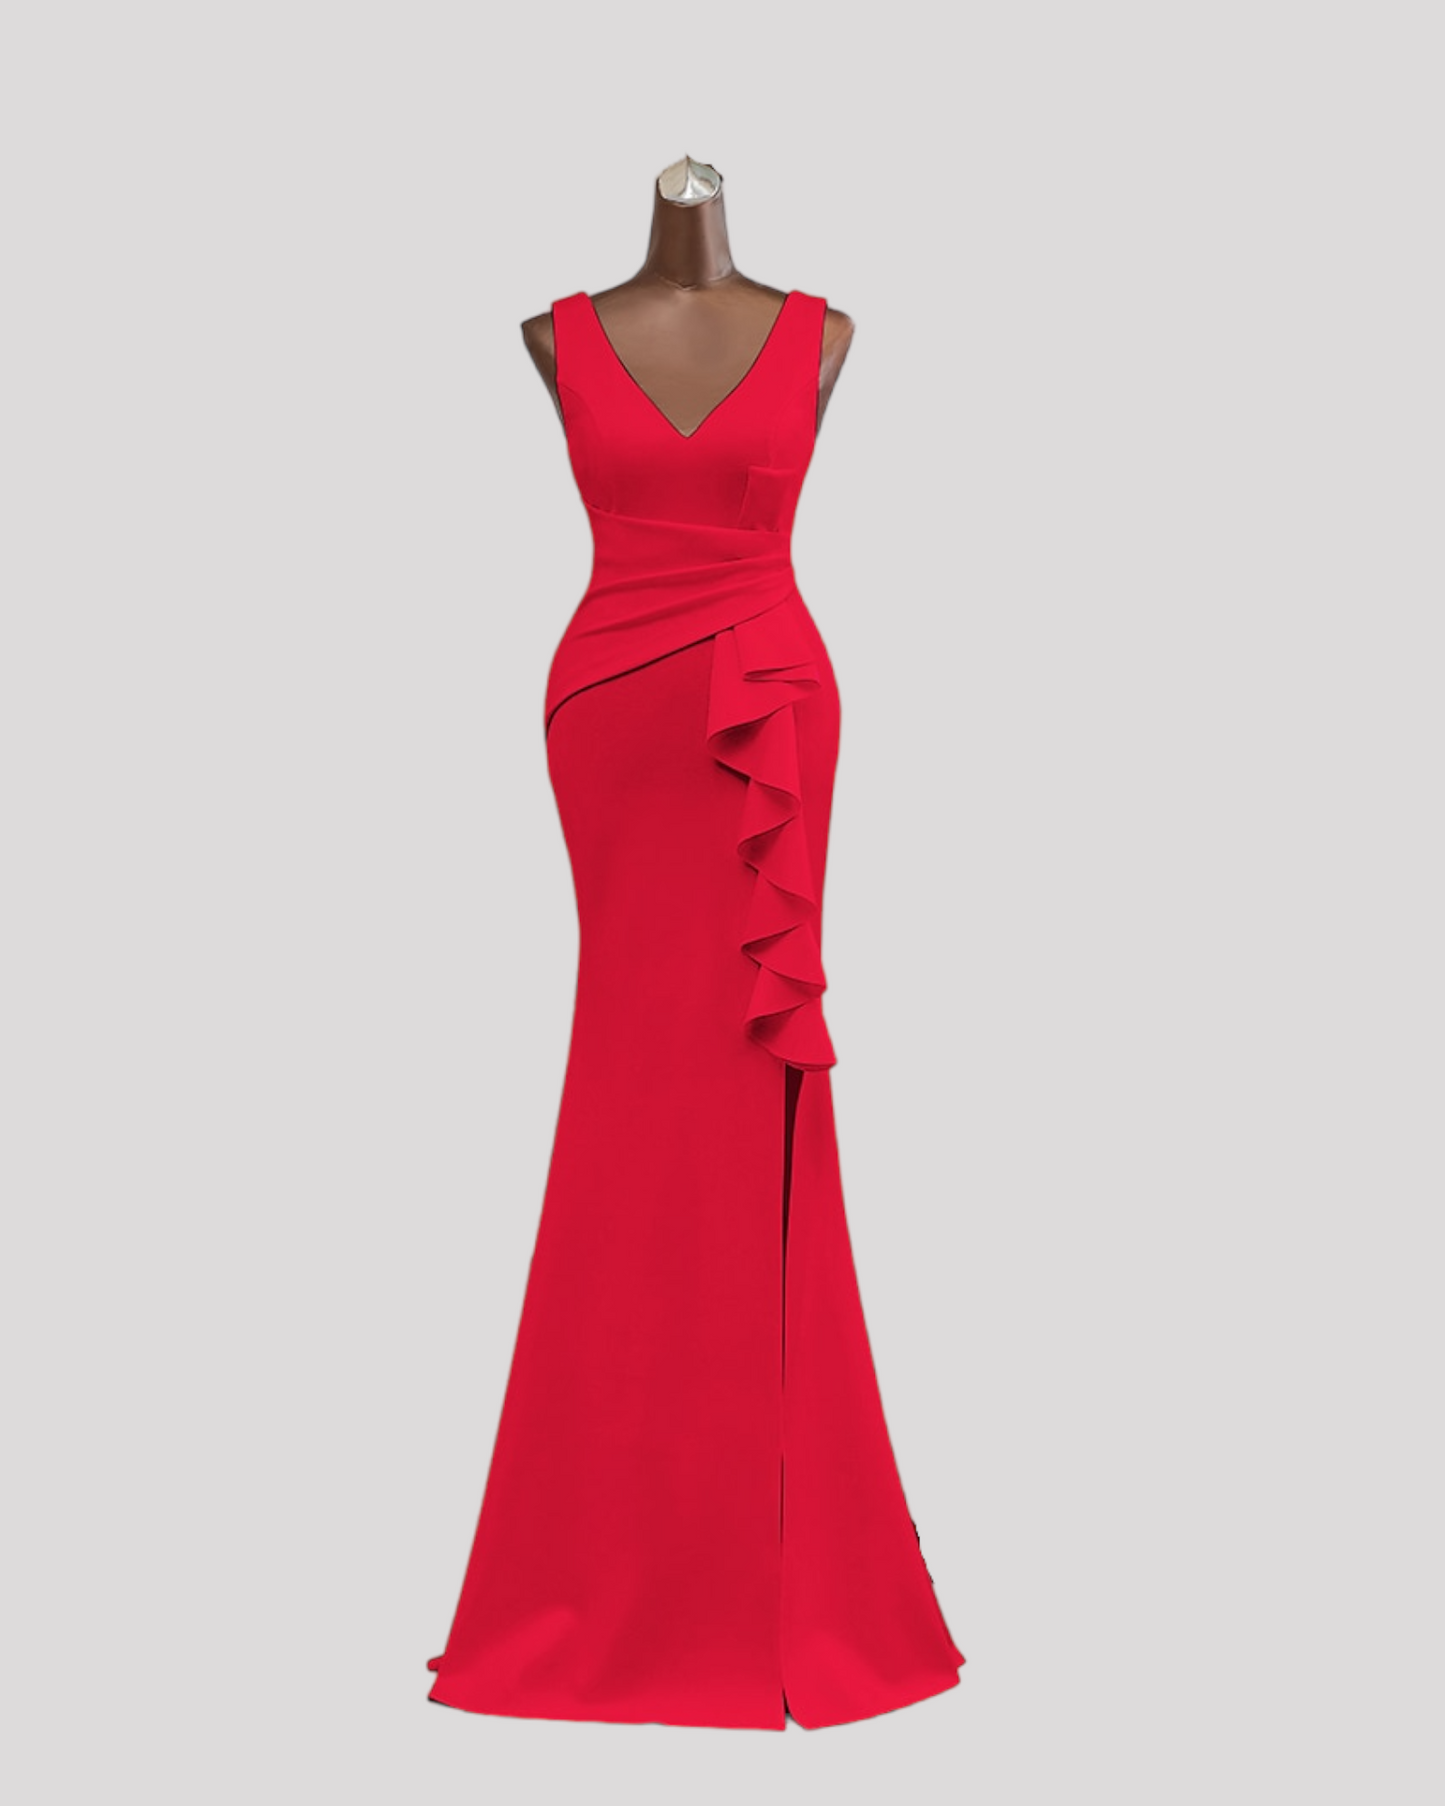 Gorgeous Pleated Bodice Evening Dress with Ruffle over Leg Split with a VNeckline Front and Back